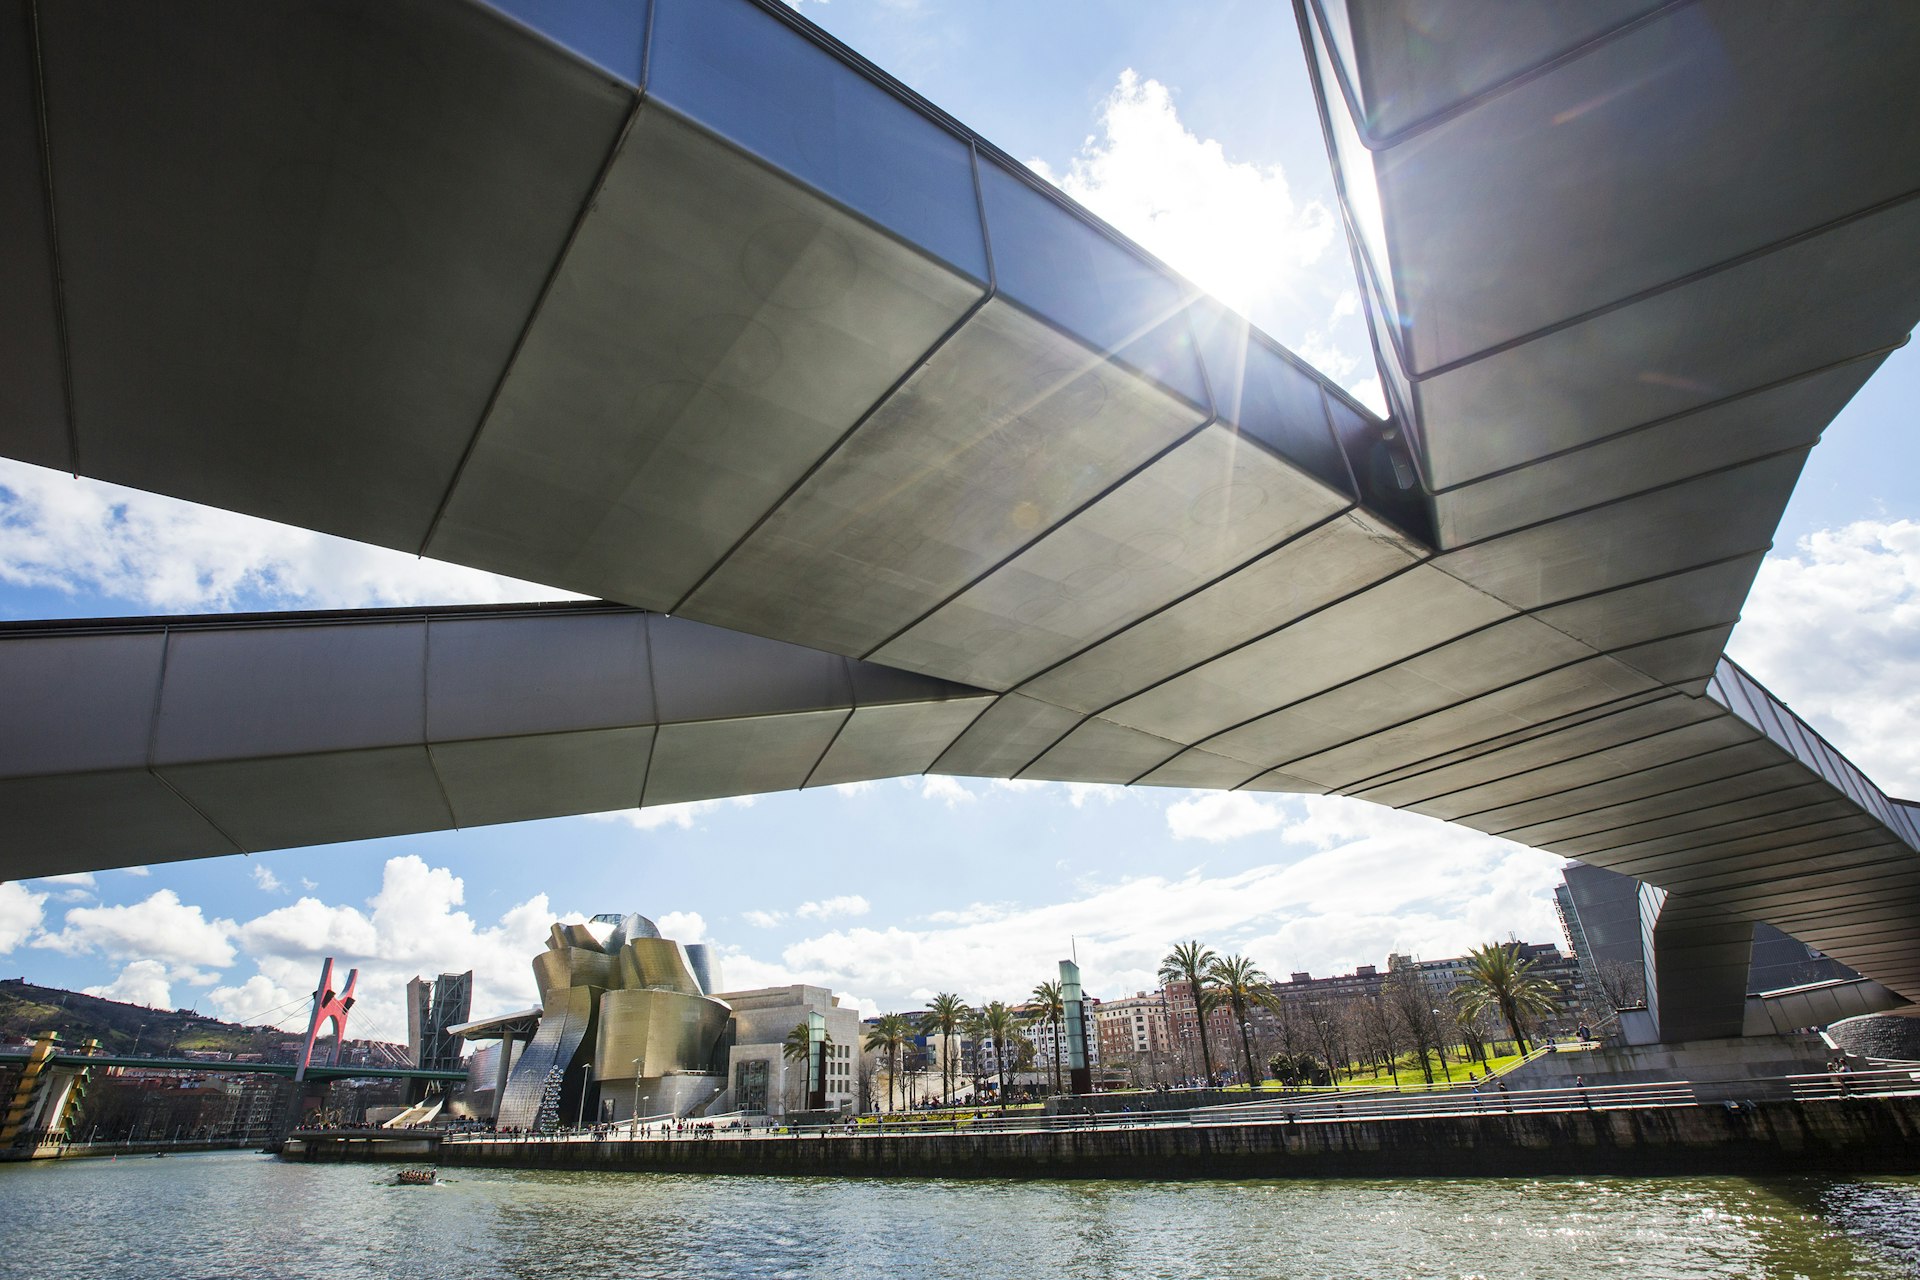 An image of a silver footbridge from below with a view of the gleaming Guggenheim on the banks of Rio Nervión in the background; visit Basque country